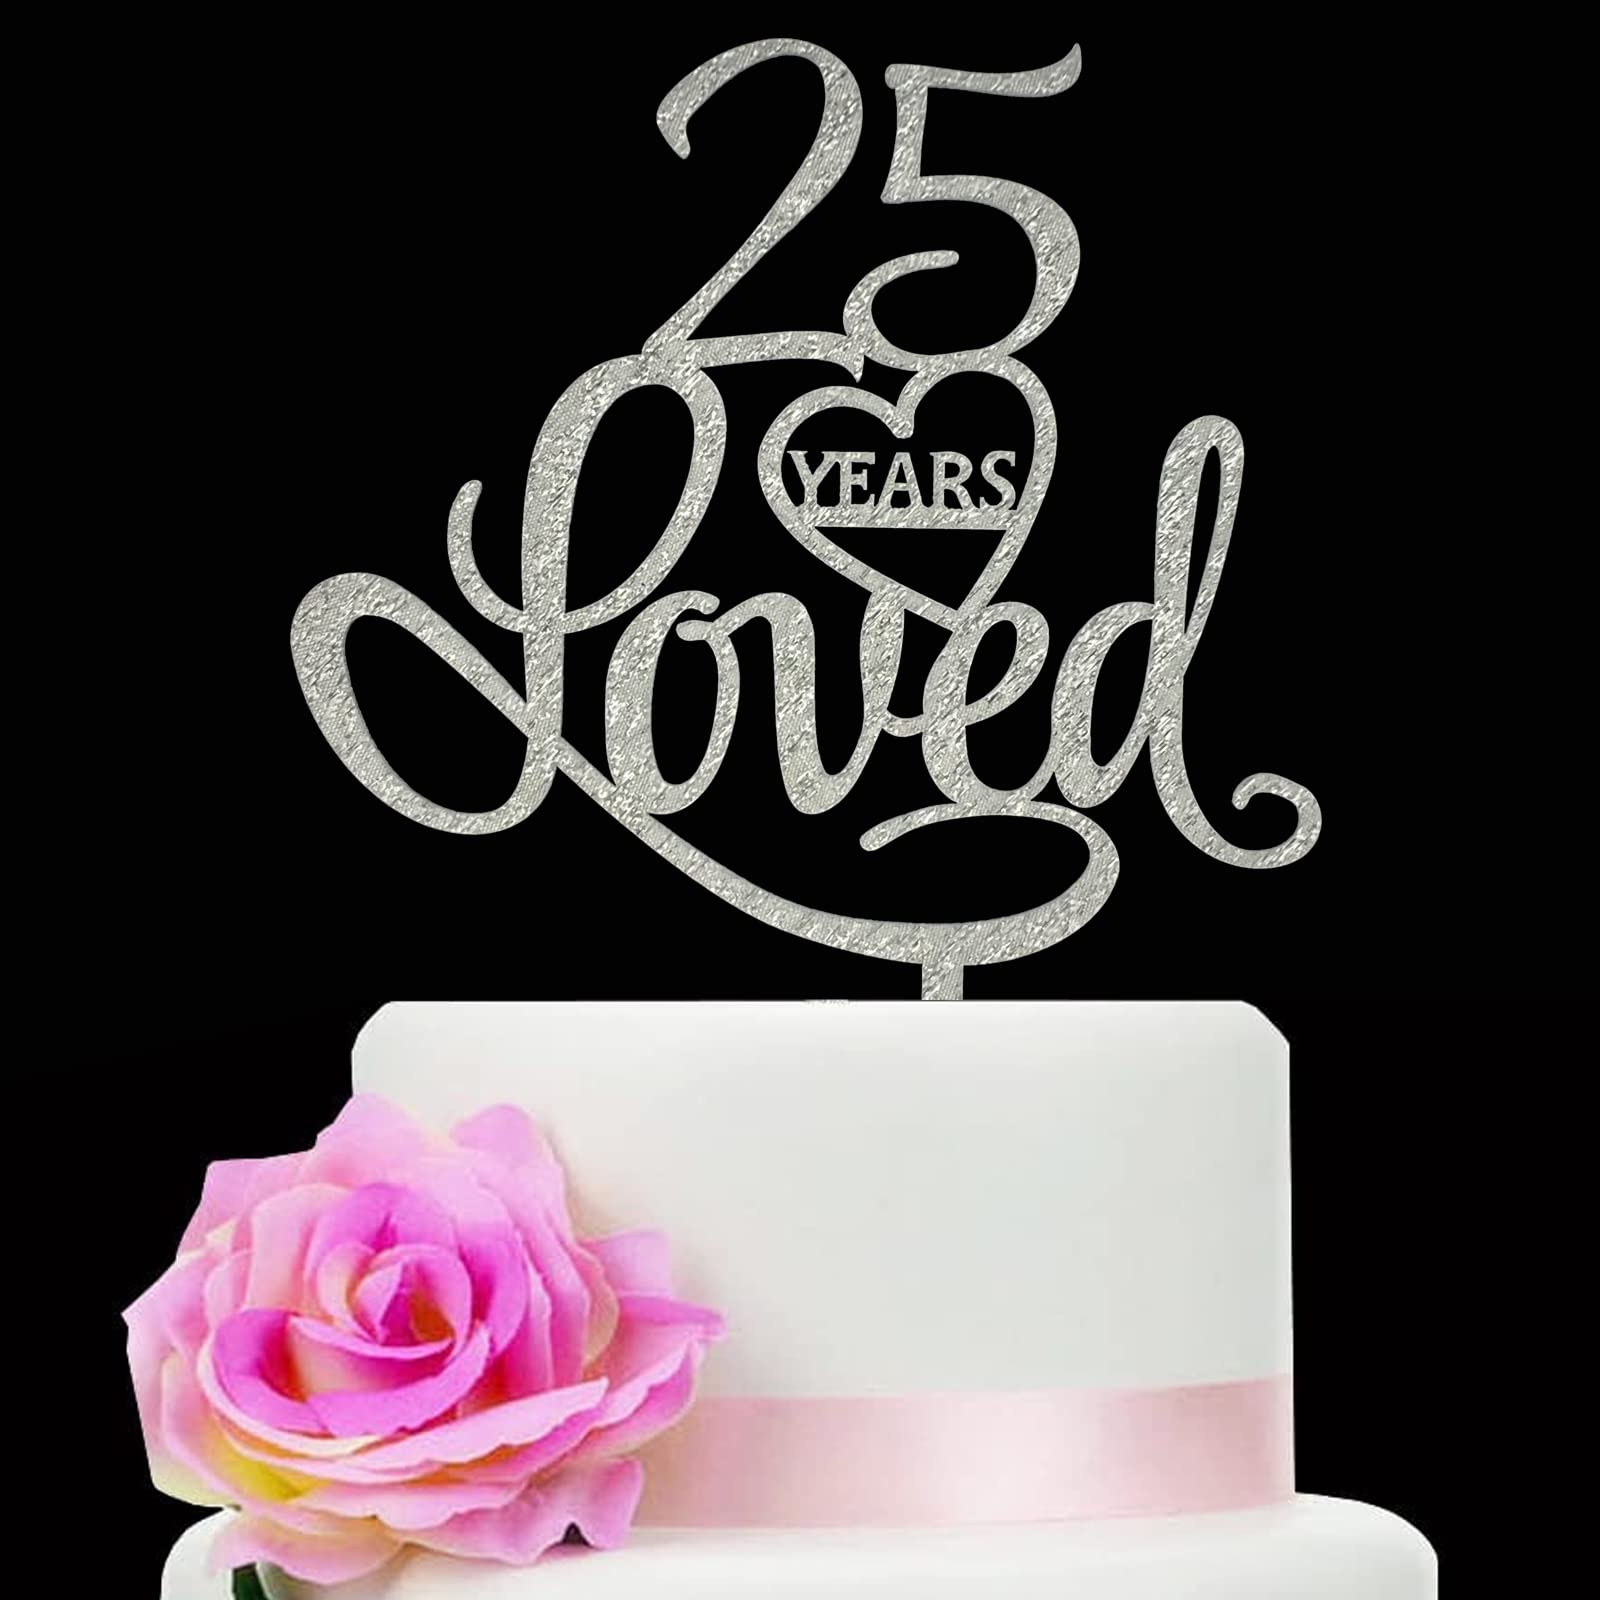 25th Anniversary Cake Topper - Country Kitchen SweetArt